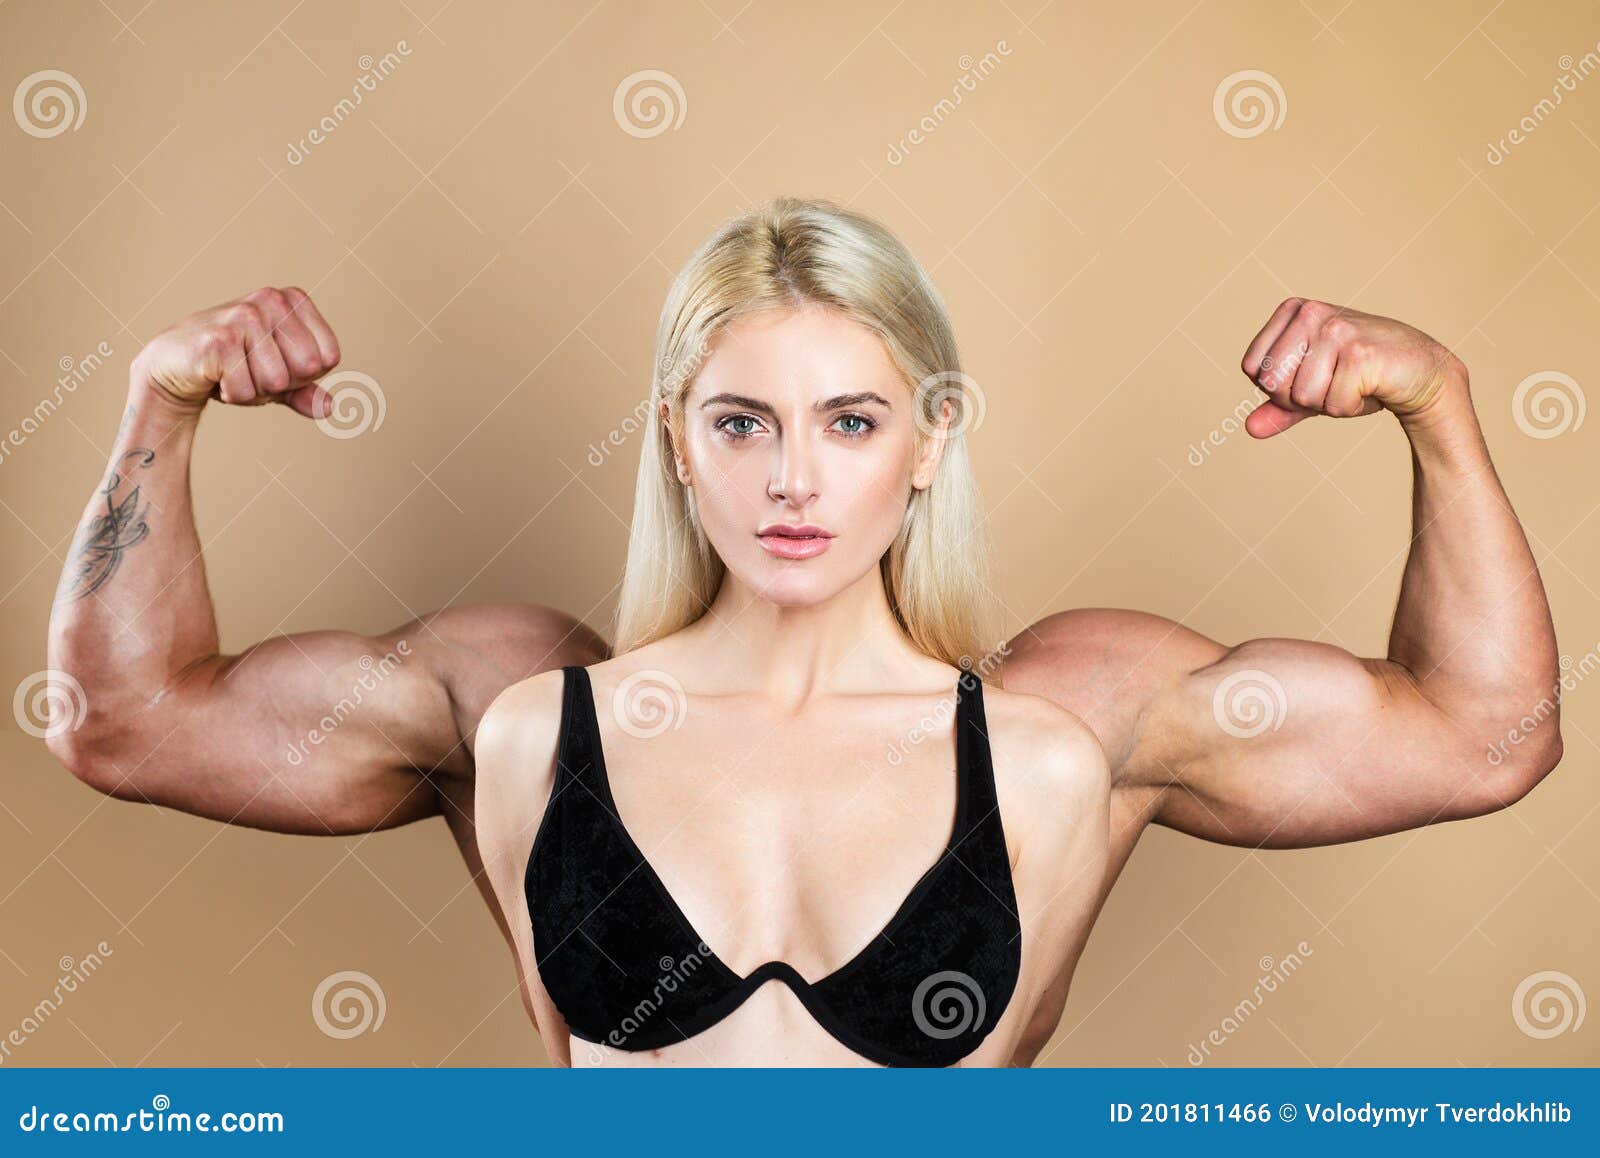 https://thumbs.dreamstime.com/z/female-model-keeps-fit-healthy-raises-hands-shows-muscles-power-strong-muscle-arms-funny-sport-woman-female-model-201811466.jpg